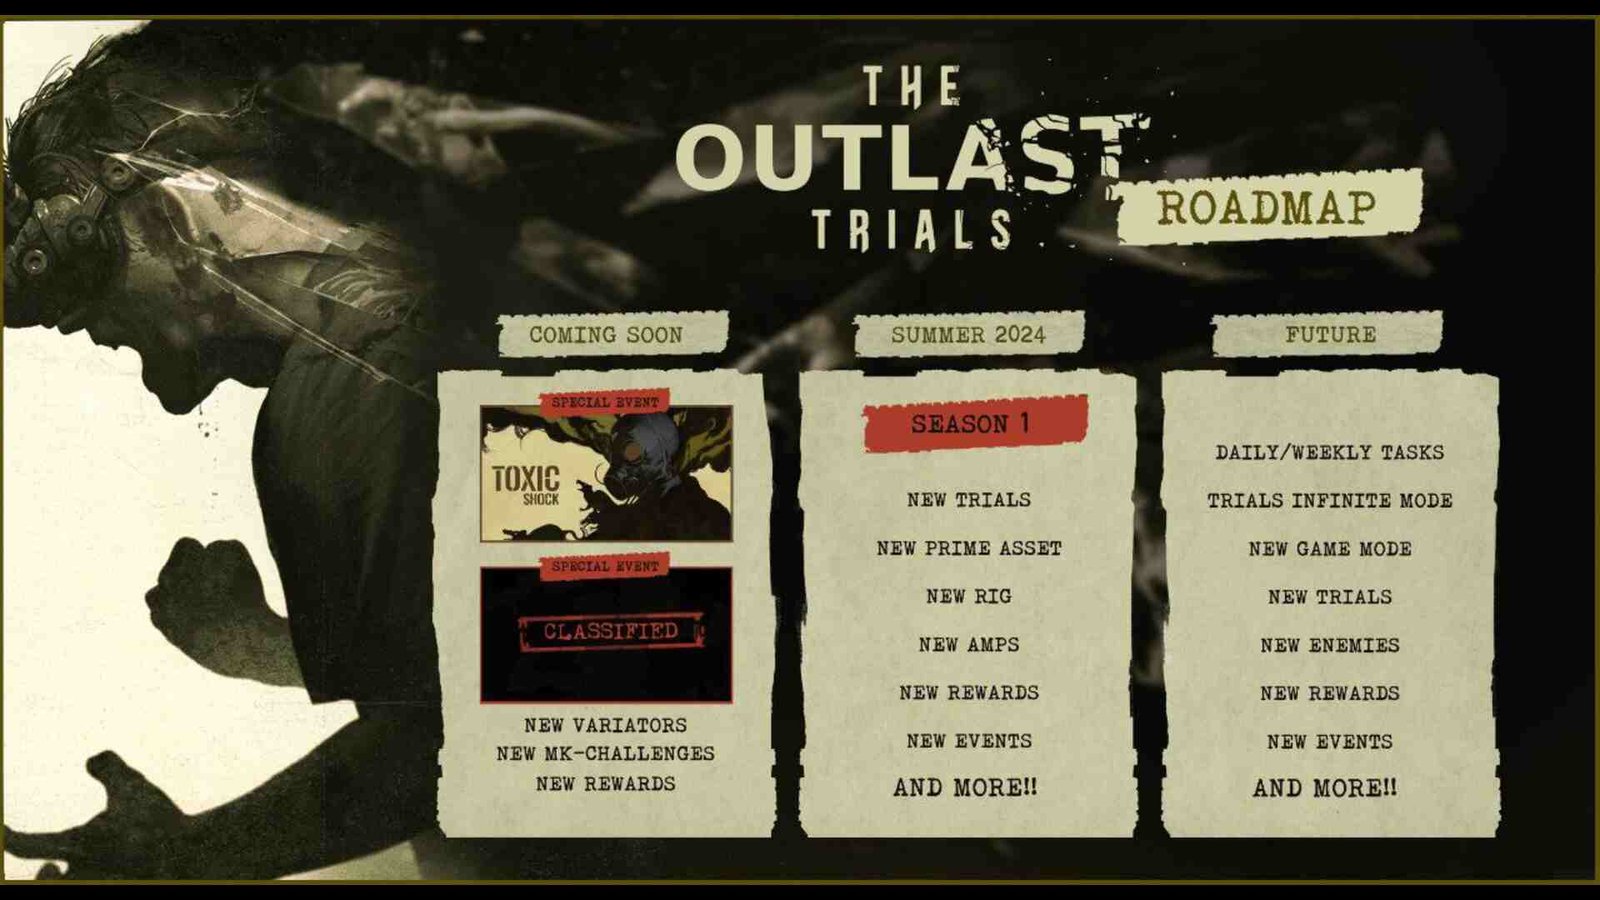 The Outlast Trials Roadmap for 2024 & more details